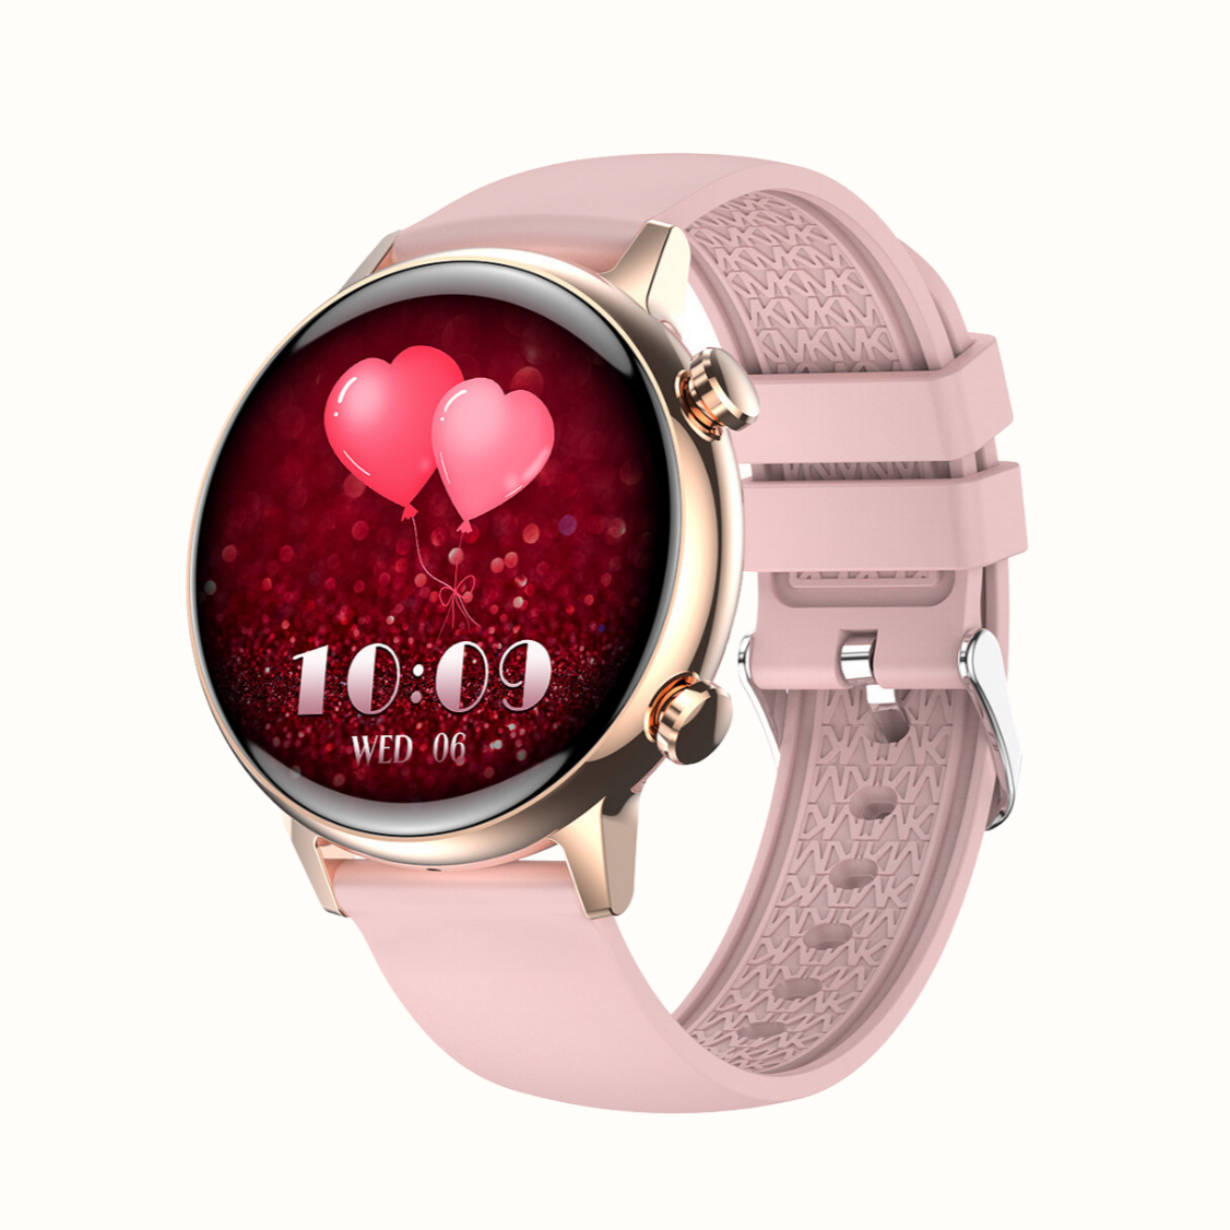 HK39 Women Smartwatch, AMOLED Display, Setup with Android device, Setup with Apple Device, Water resistance - IP68, Best Smart Watch, 2023, Track Activity,Track WOmens Health, Pedometer, Calorie Monitor, Sleep Tracking, Heart Rate Monitor, Blood Oxygen Monitor- Spo2, Multisport Mode, Color - Pink